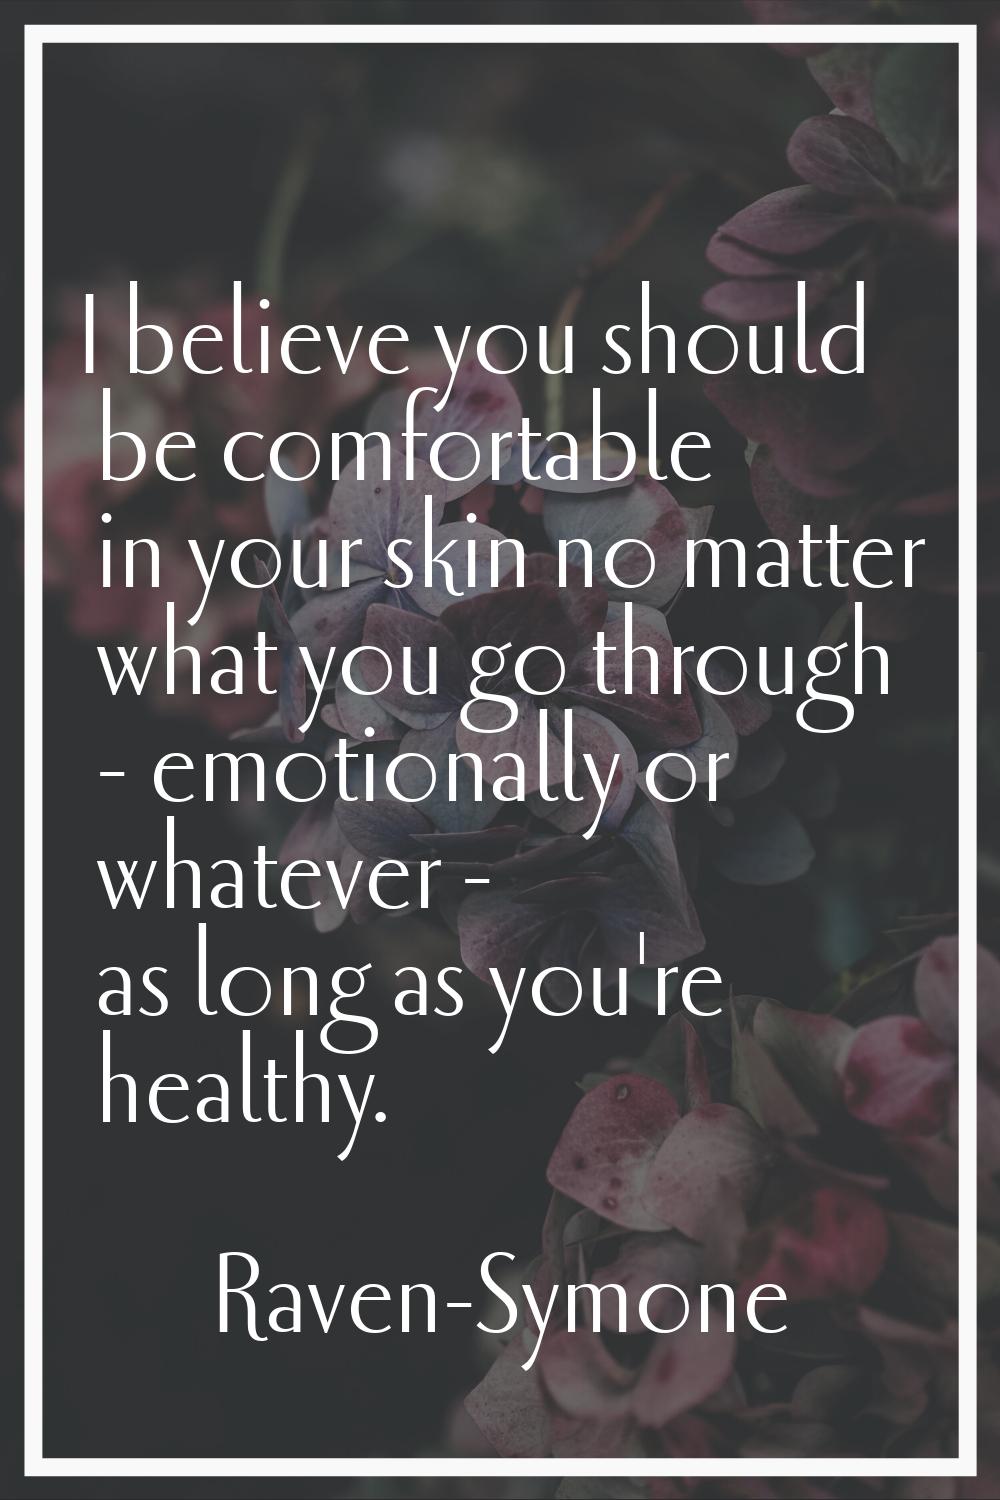 I believe you should be comfortable in your skin no matter what you go through - emotionally or wha